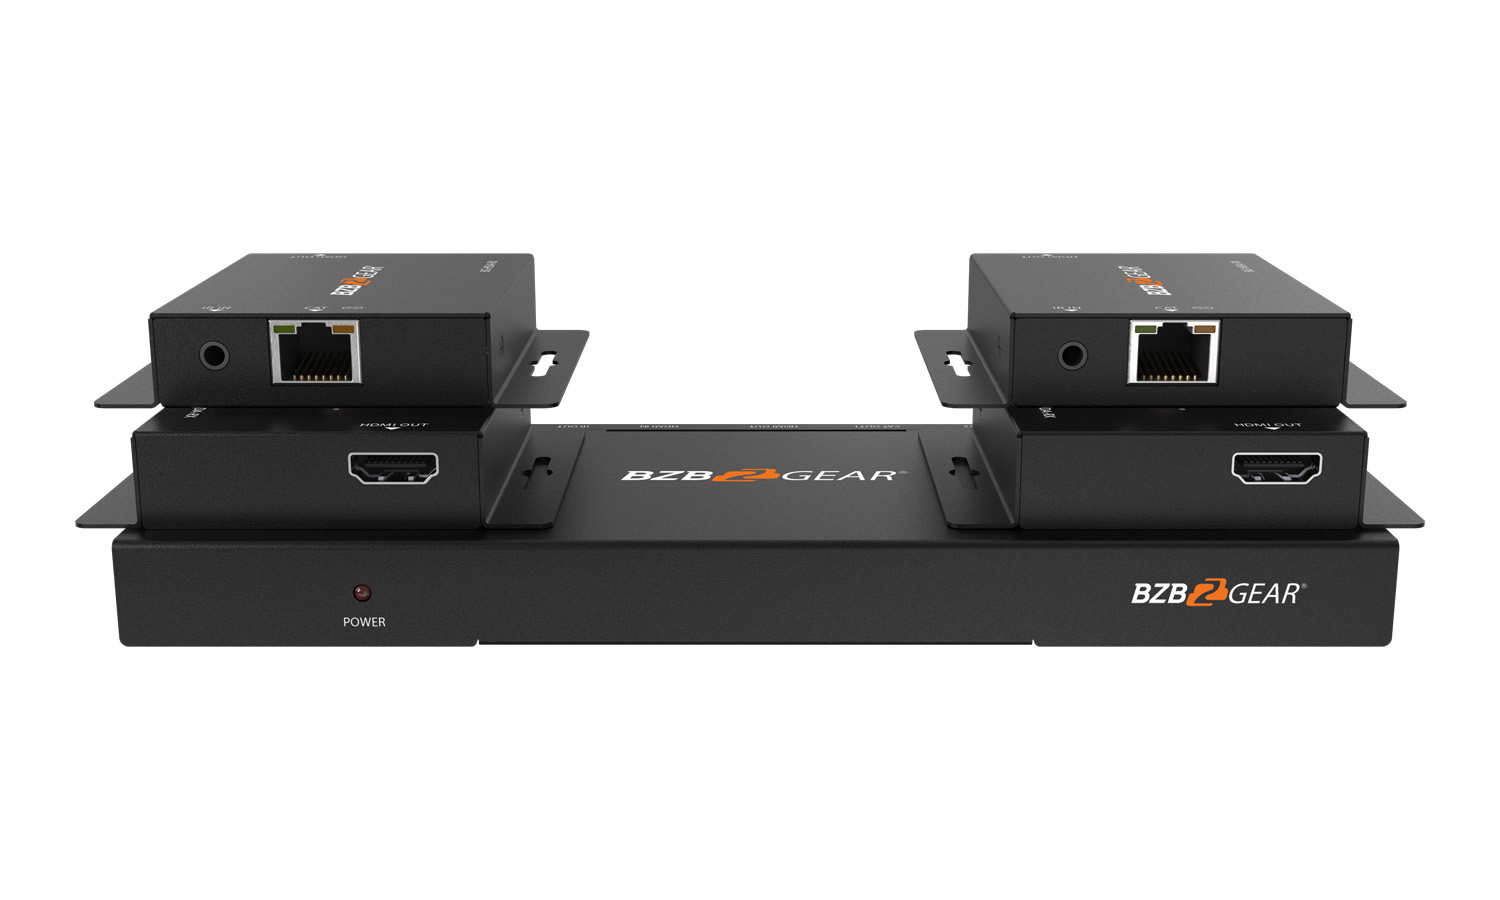 BG-HDA-E14 1x4 1080P/4K30 HDMI Splitter/Distribution Amplifier up to 230ft over Category Cable by BZBGEAR